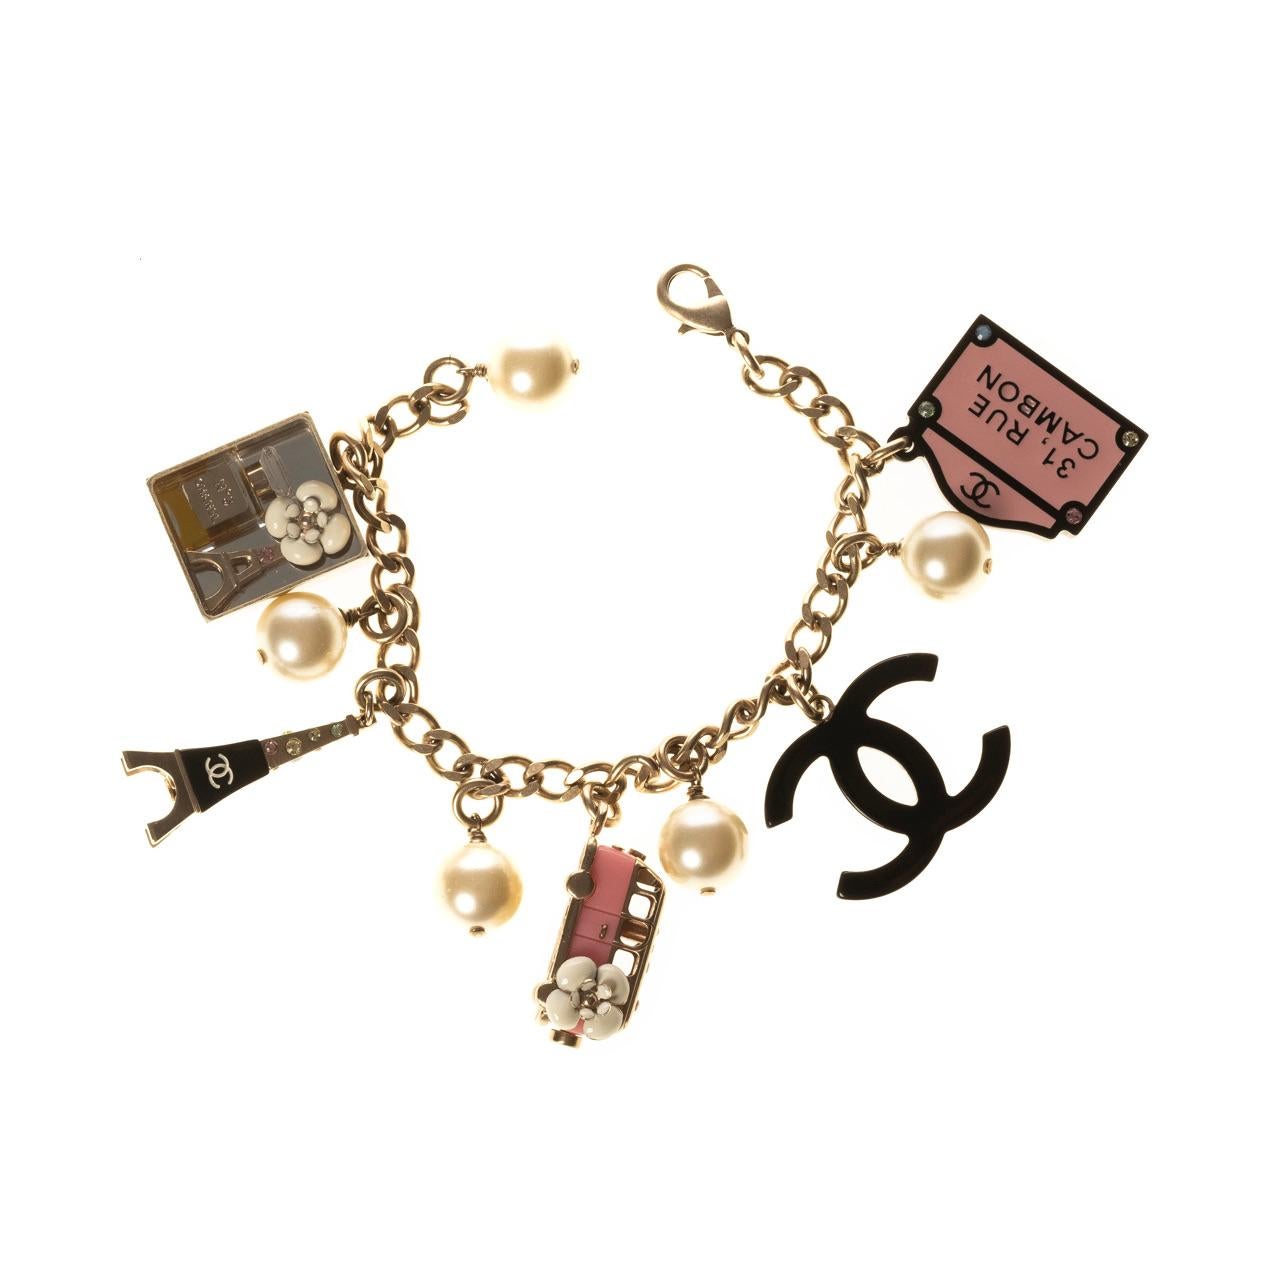 Chanel bracelet with multiple charms including an Eiffel Tower, vintage bus, Chanel logo and multiple faux pearls. Featuring a weight of roughly 50g, Chanel signature, Strass crystal embellishments, resin and enamel accents and lobster clasp